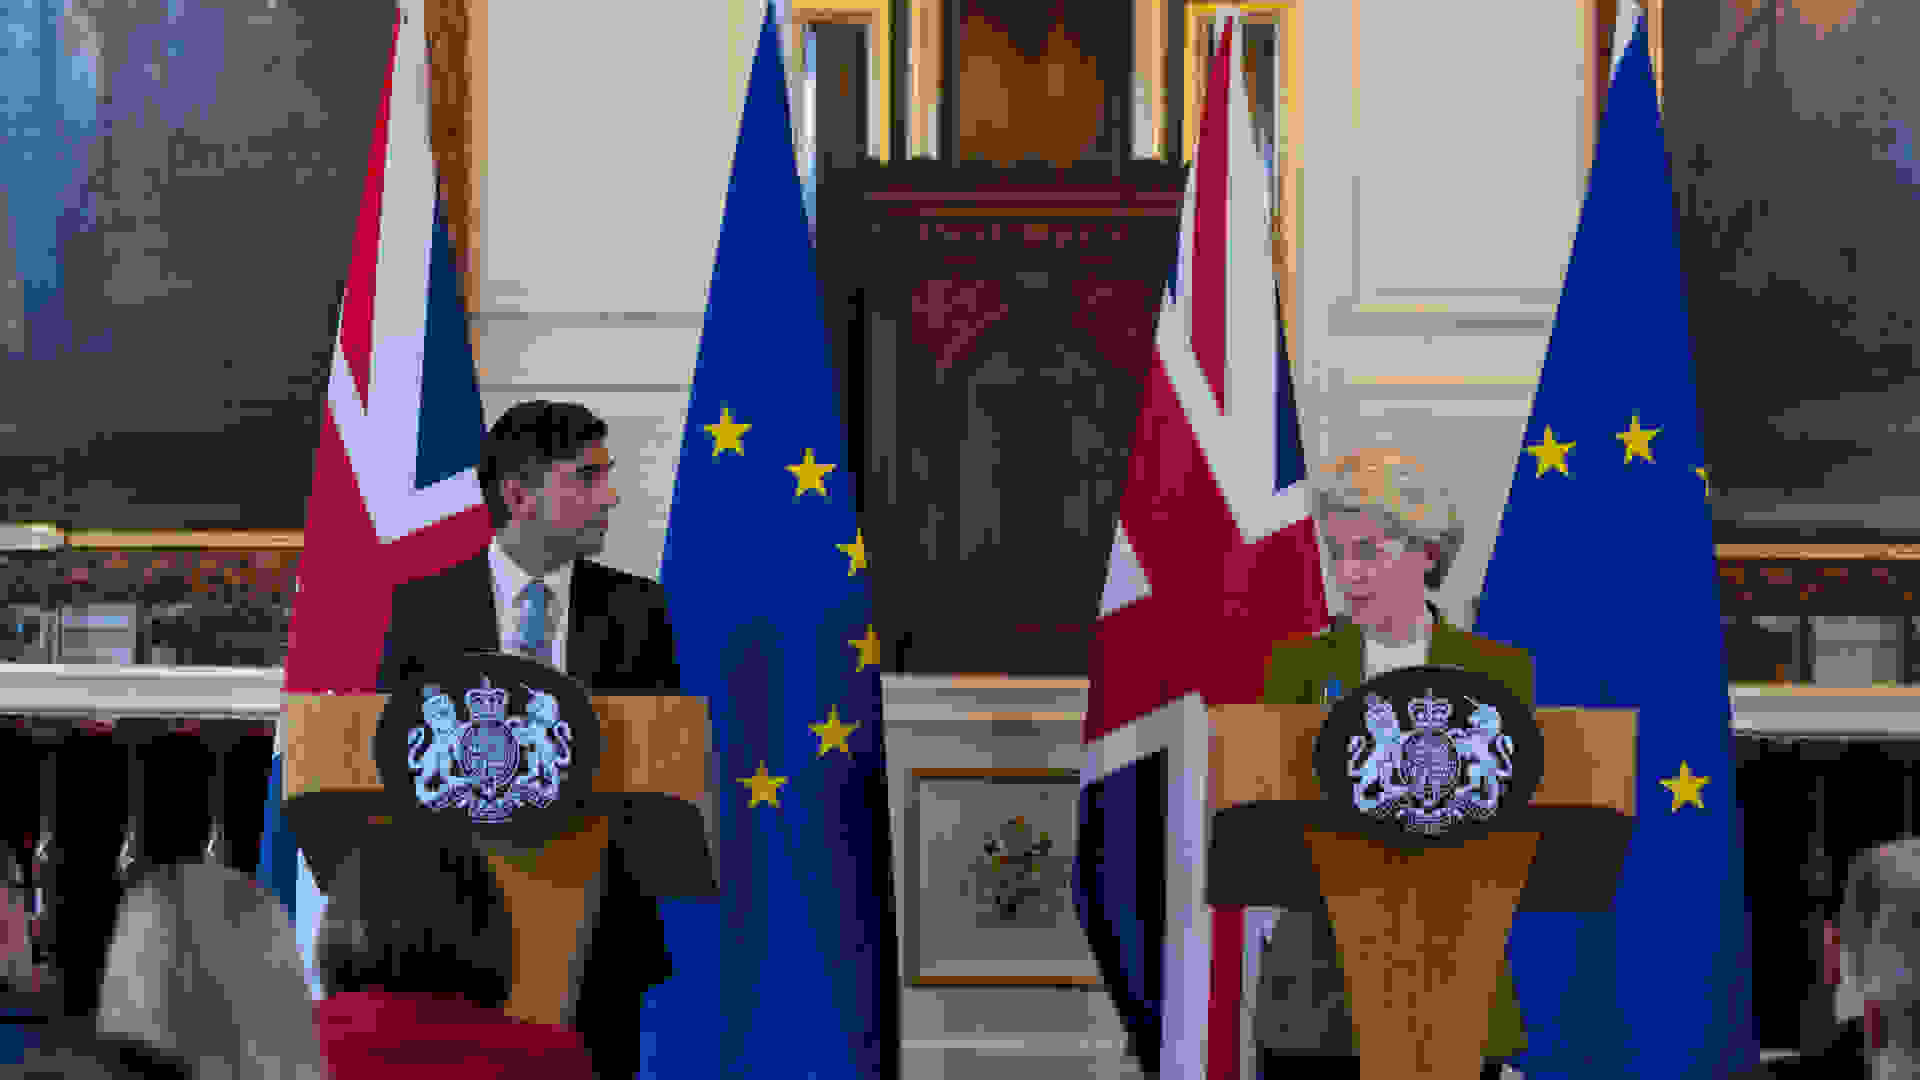 Prime Minister Rishi Sunak holds a joint press conference with the President of the European Commission Ursula von der Leyen in Windsor Guildhall. ©Simon Walker / Number 10